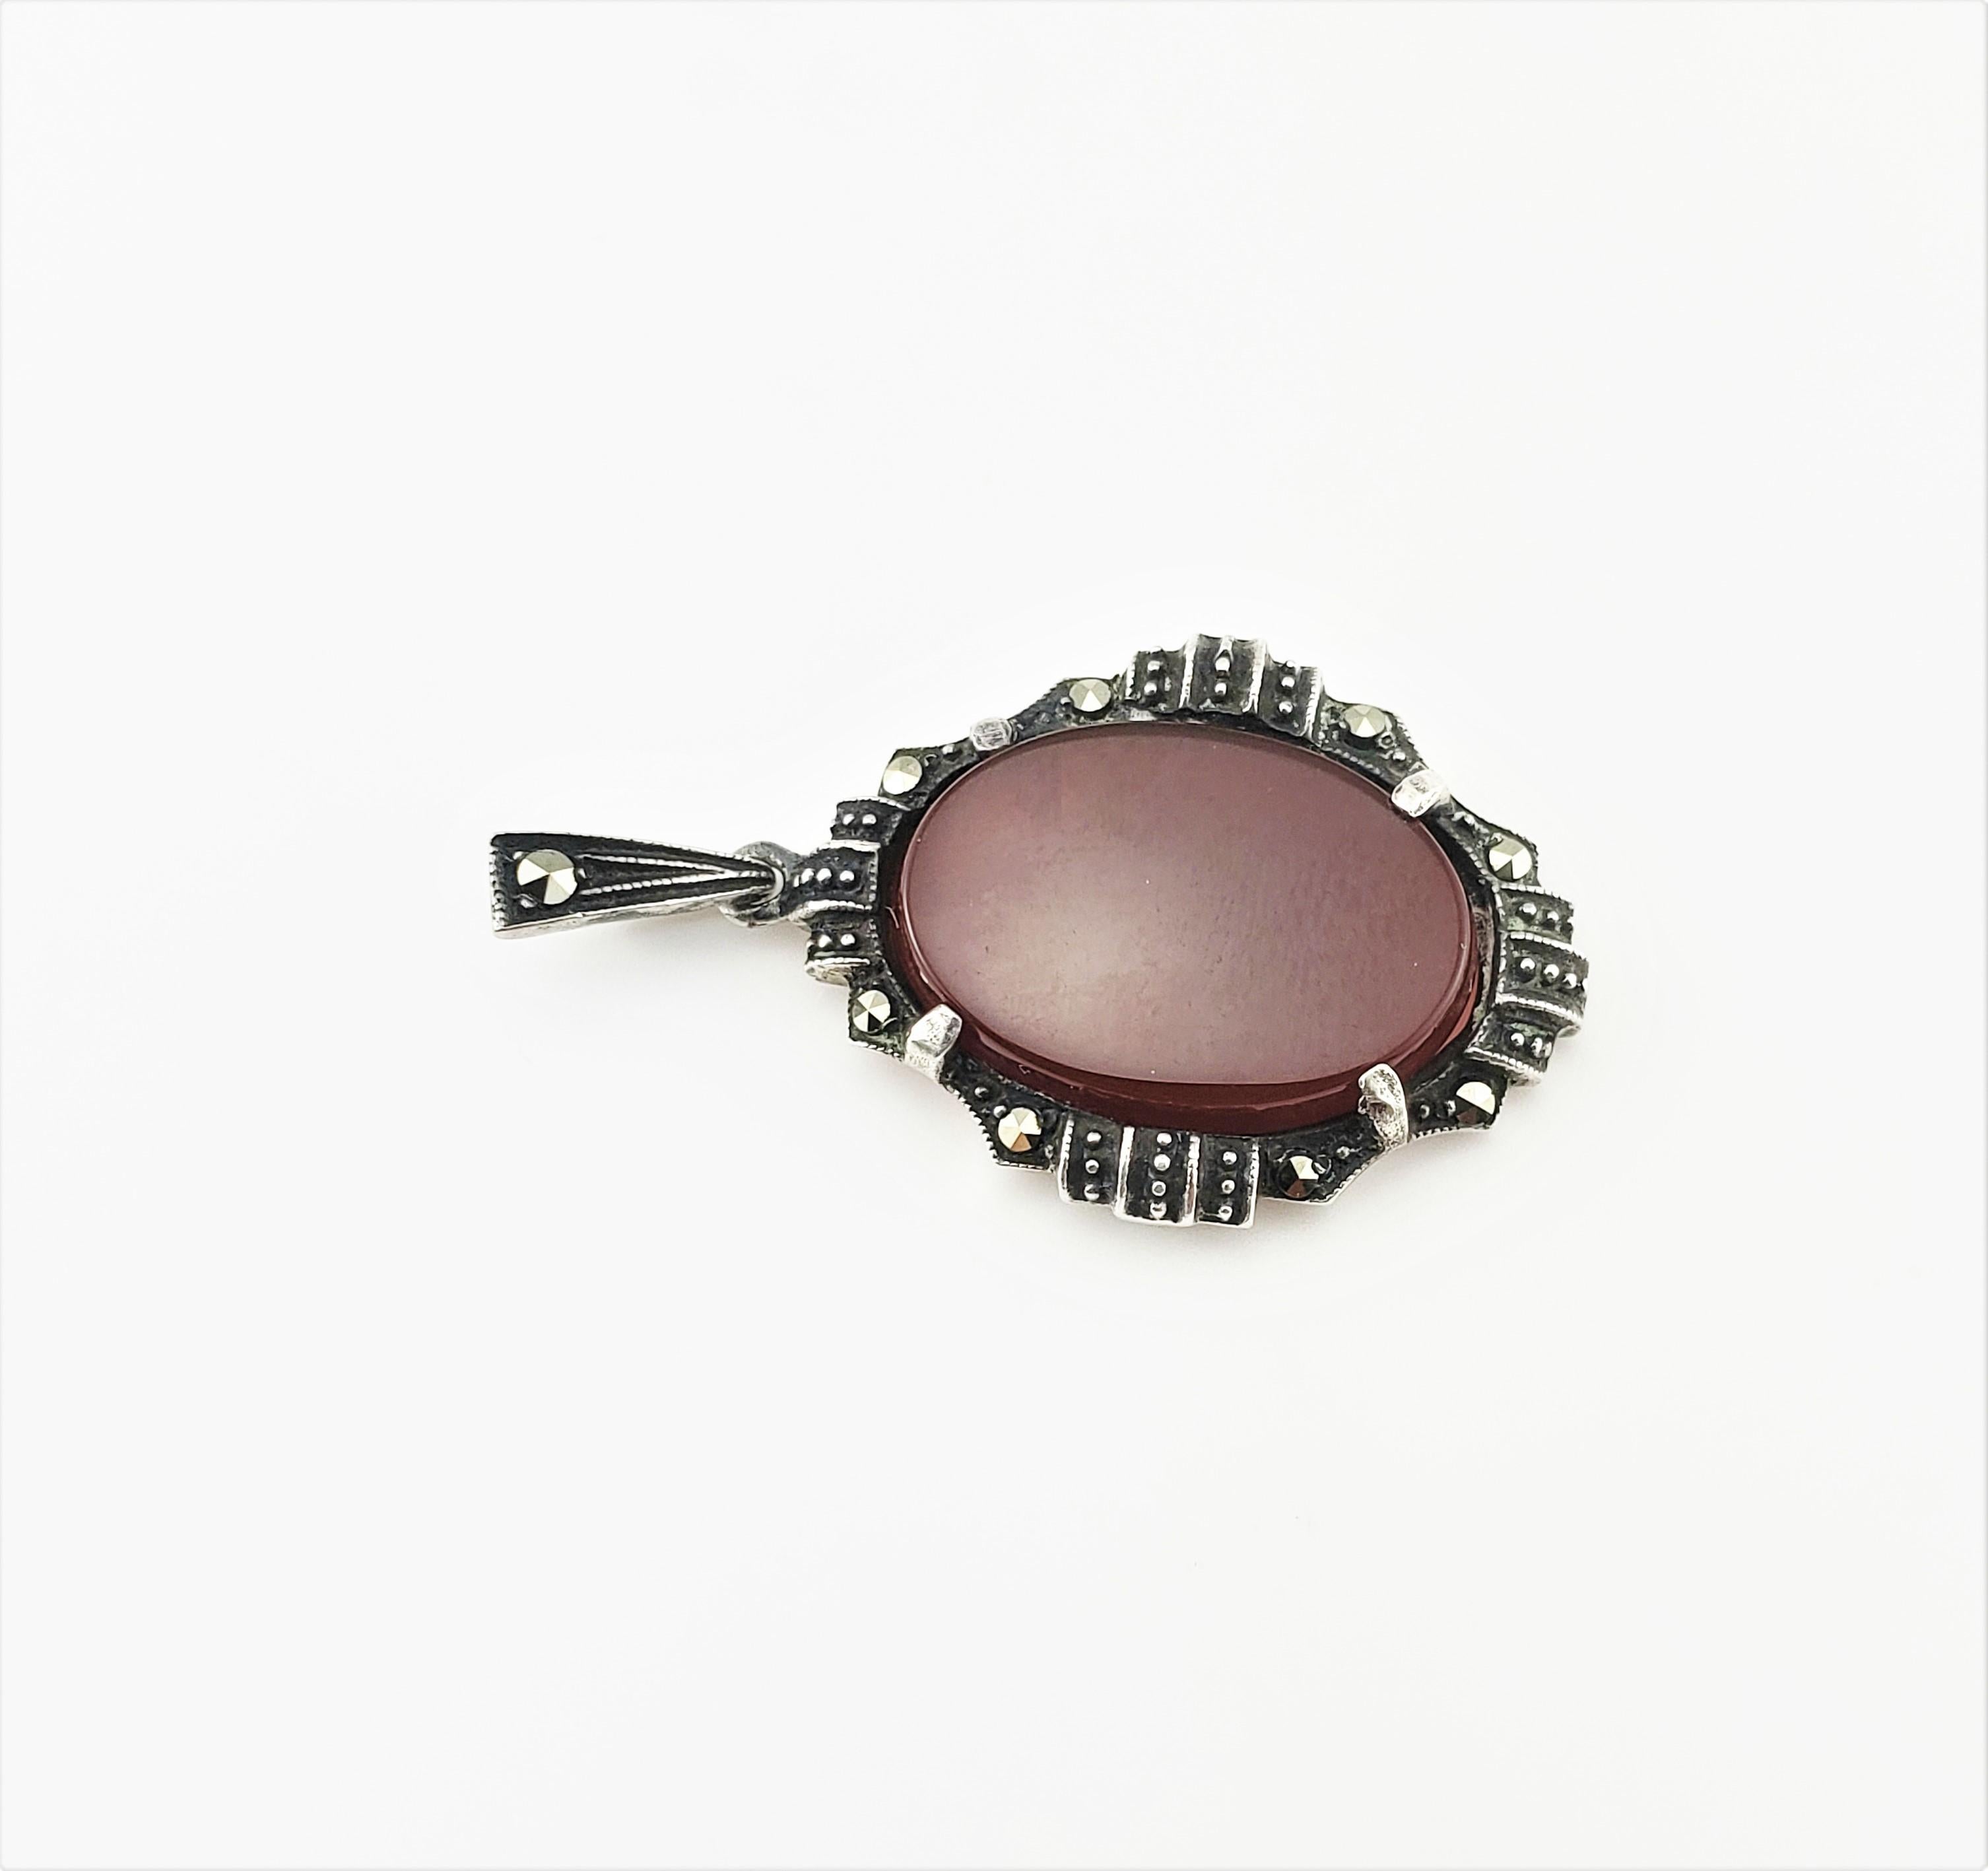 Vintage Heirloom Vintage Sterling Silver Marcasite Carnelian Pendant-

This lovely marcasite pendant features one oval carnelian (17 mm x 12 mm) set in beautifully detailed sterling silver.

Size: 1 3/8